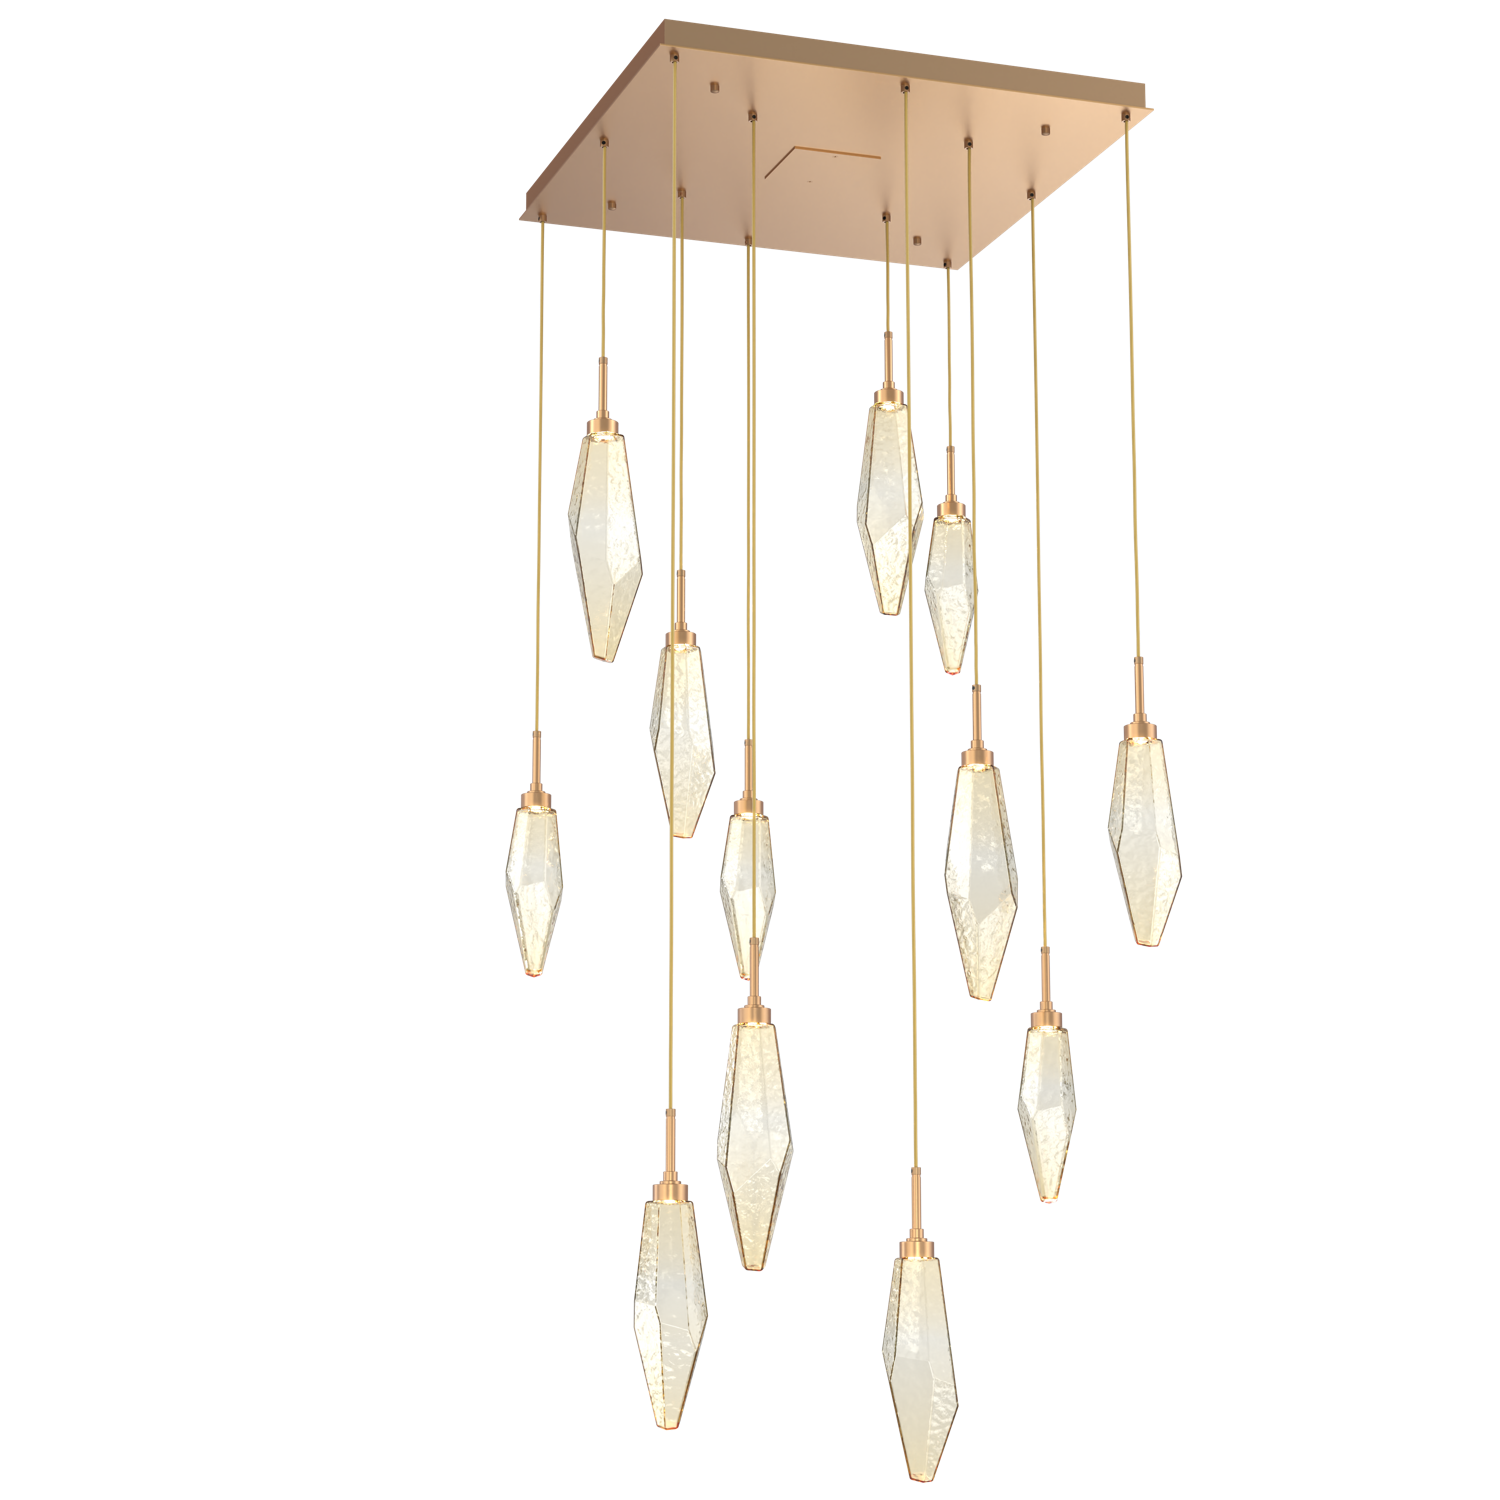 CHB0050-12-NB-CA-Hammerton-Studio-Rock-Crystal-12-light-square-pendant-chandelier-with-novel-brass-finish-and-chilled-amber-blown-glass-shades-and-LED-lamping